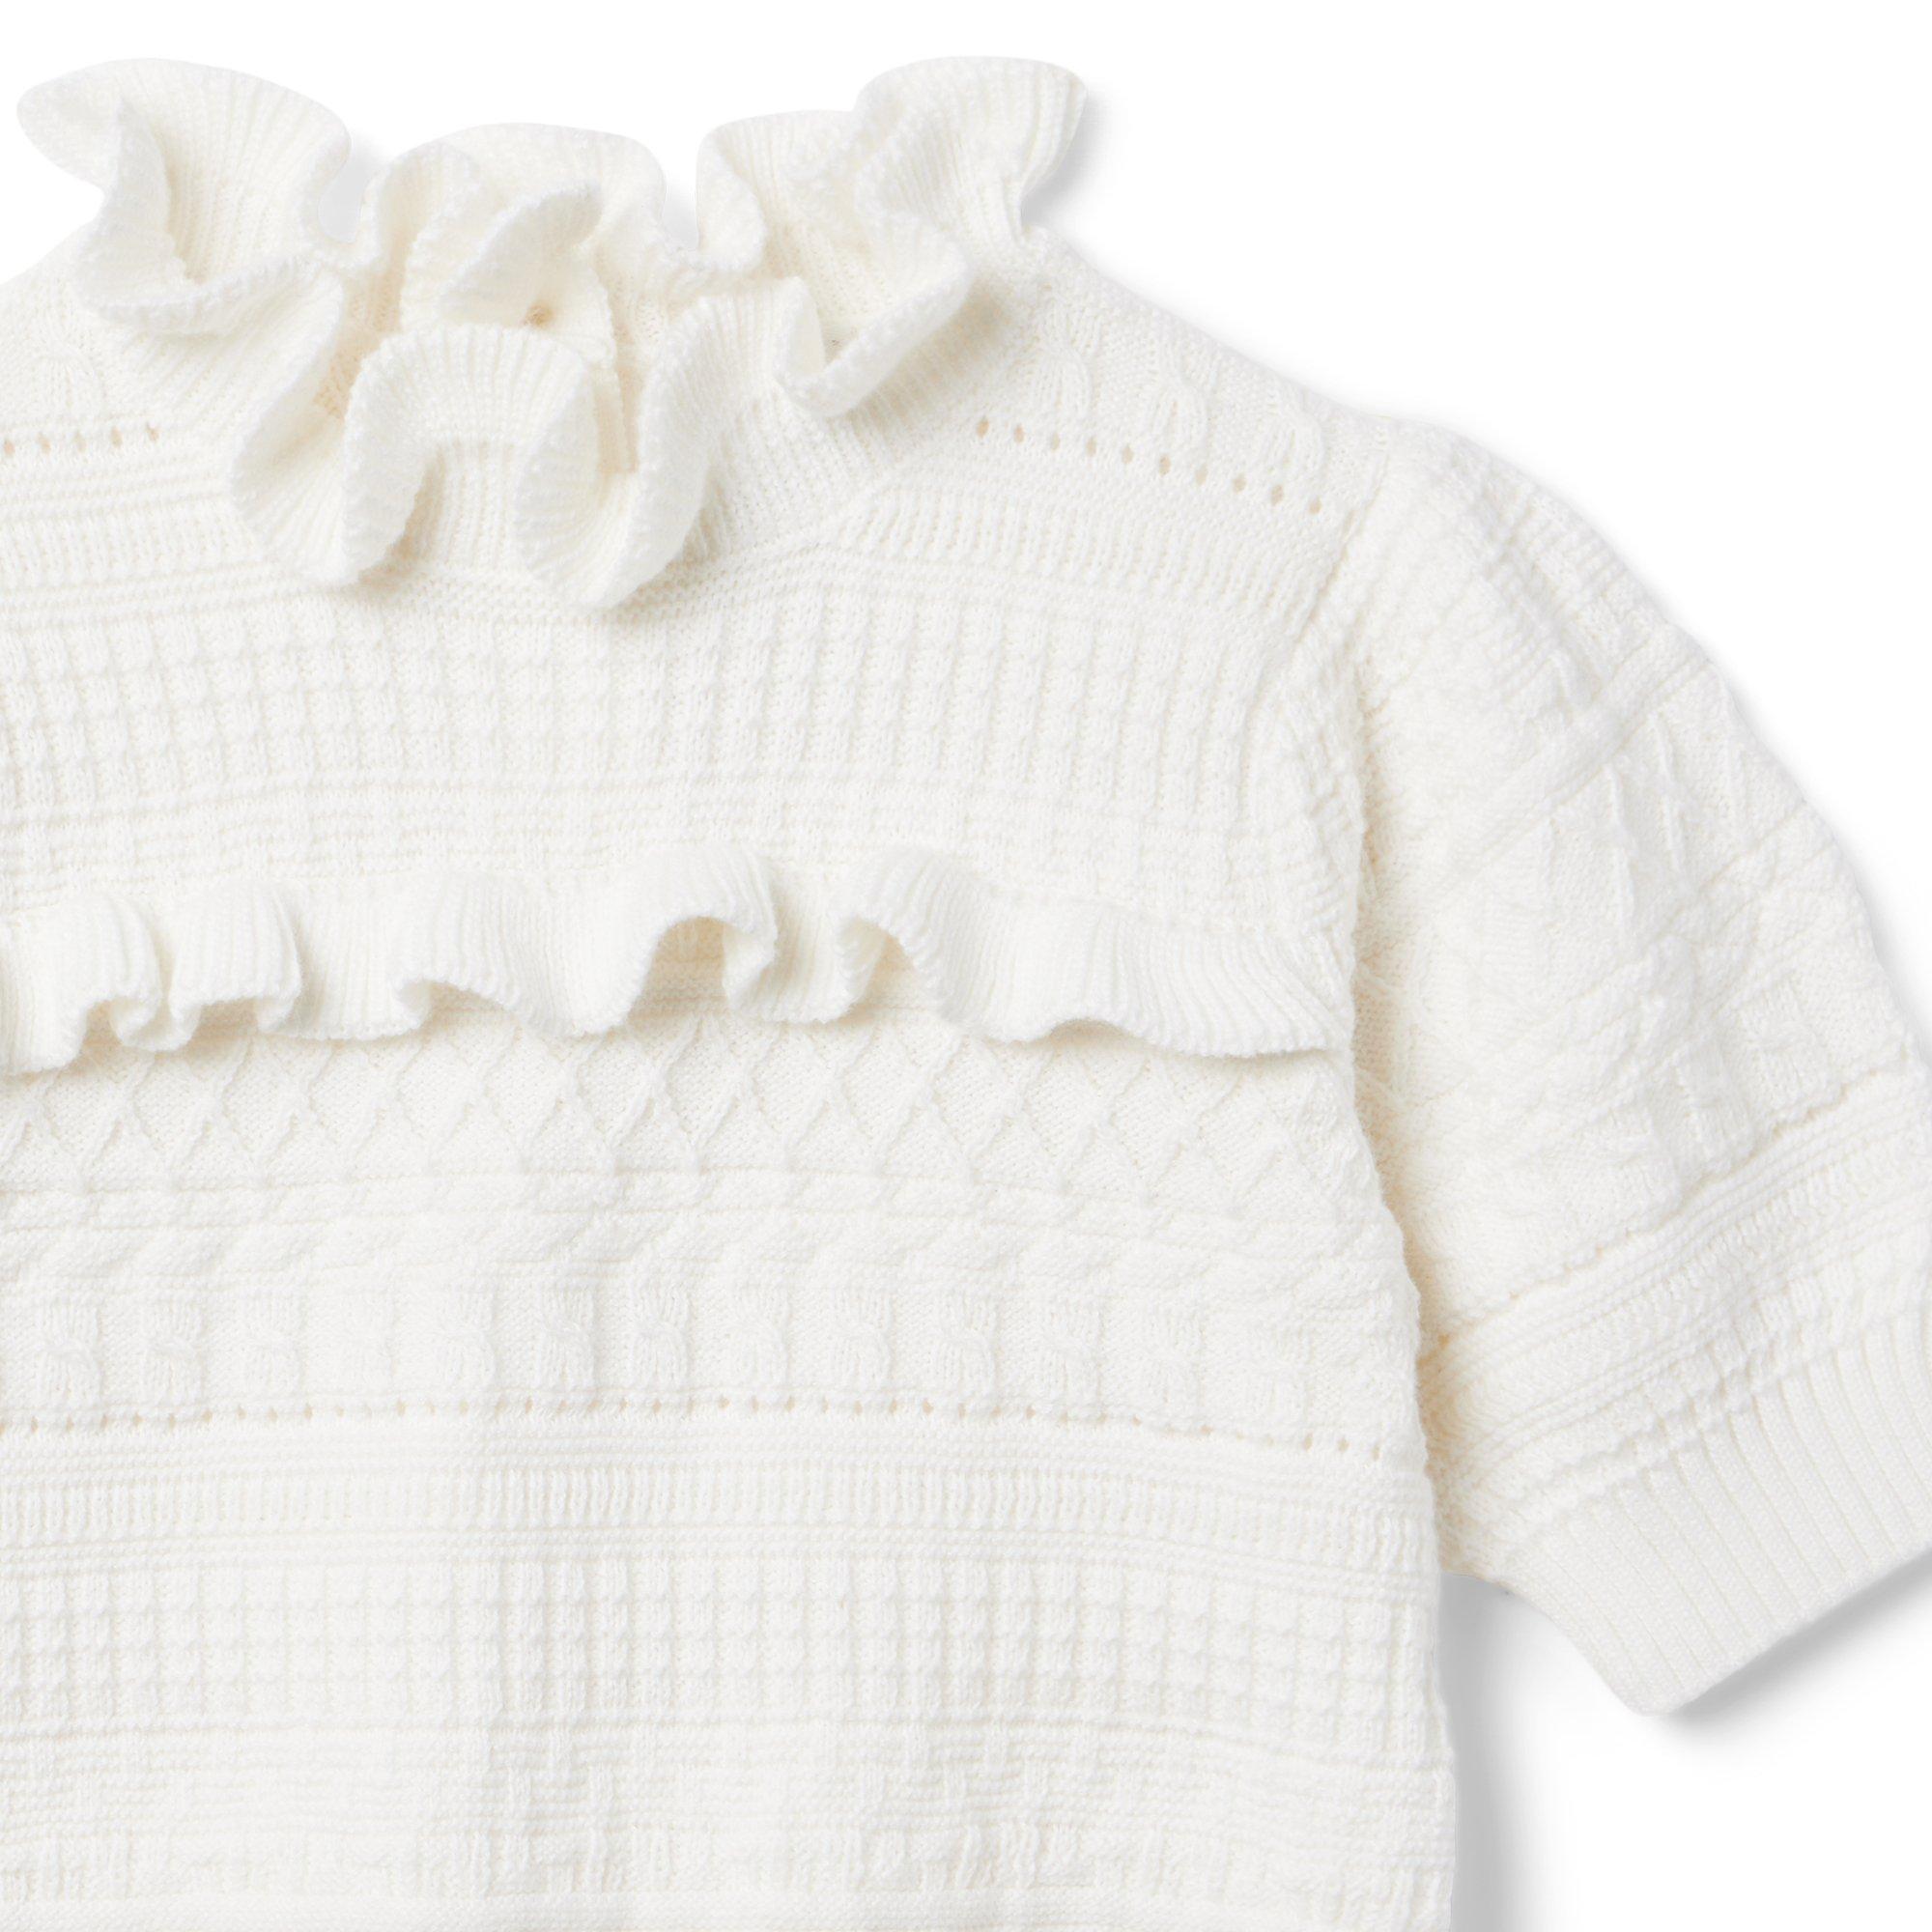 The Heights Sweater Top